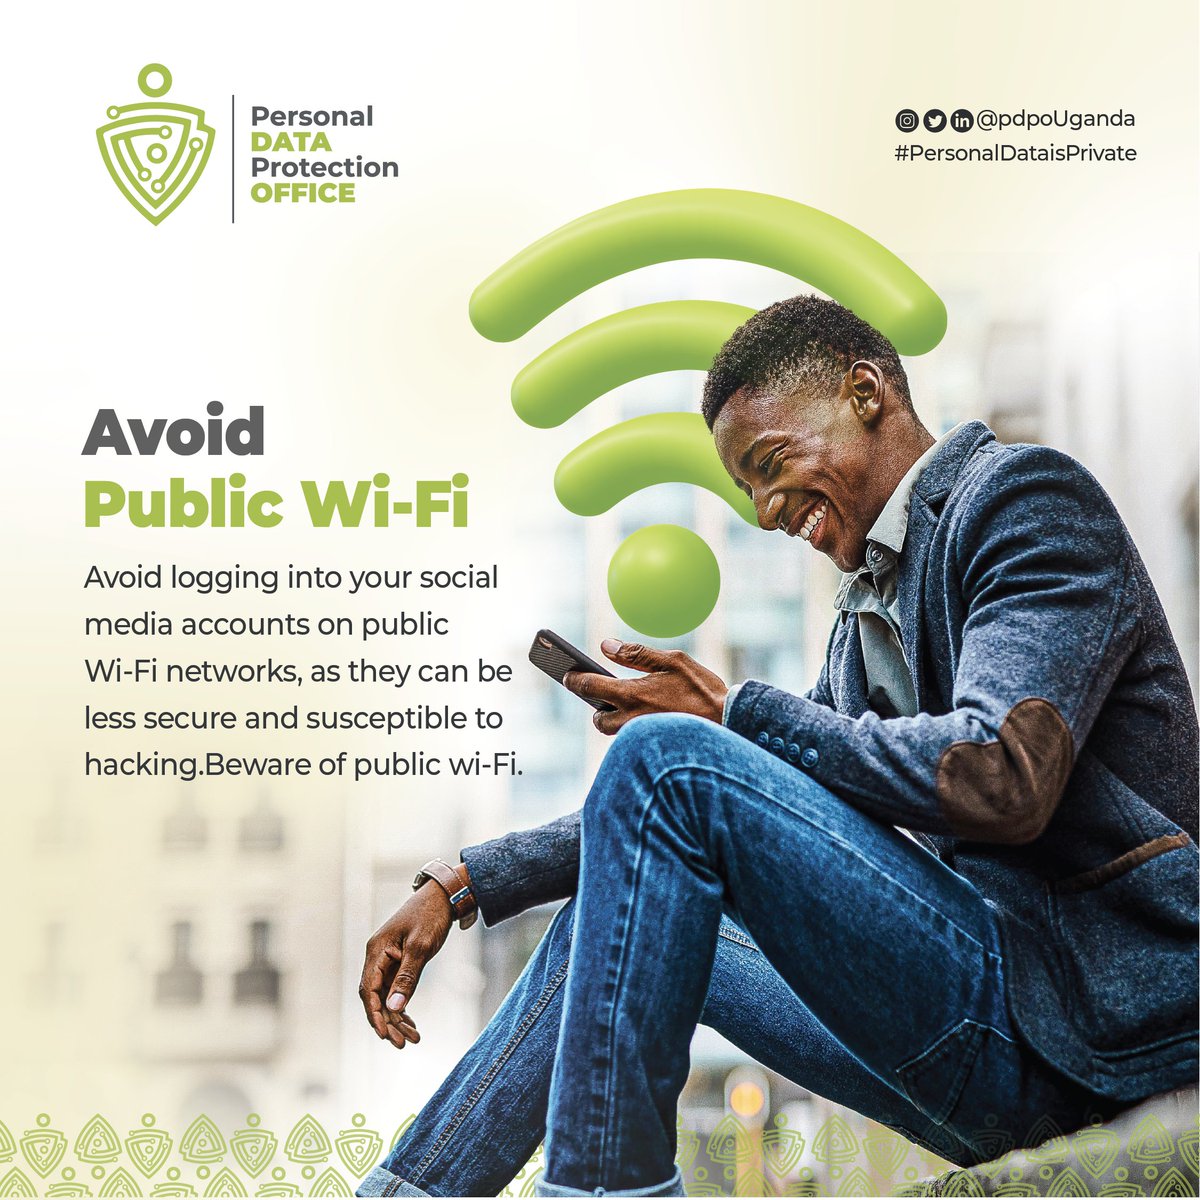 Did you know? Public Wi-Fi networks are often less secure than private ones, making it easier for hackers to intercept data transmitted over them. When you log in to your accounts on public Wi-Fi, you risk exposing sensitive information like passwords and personal details. Avoid